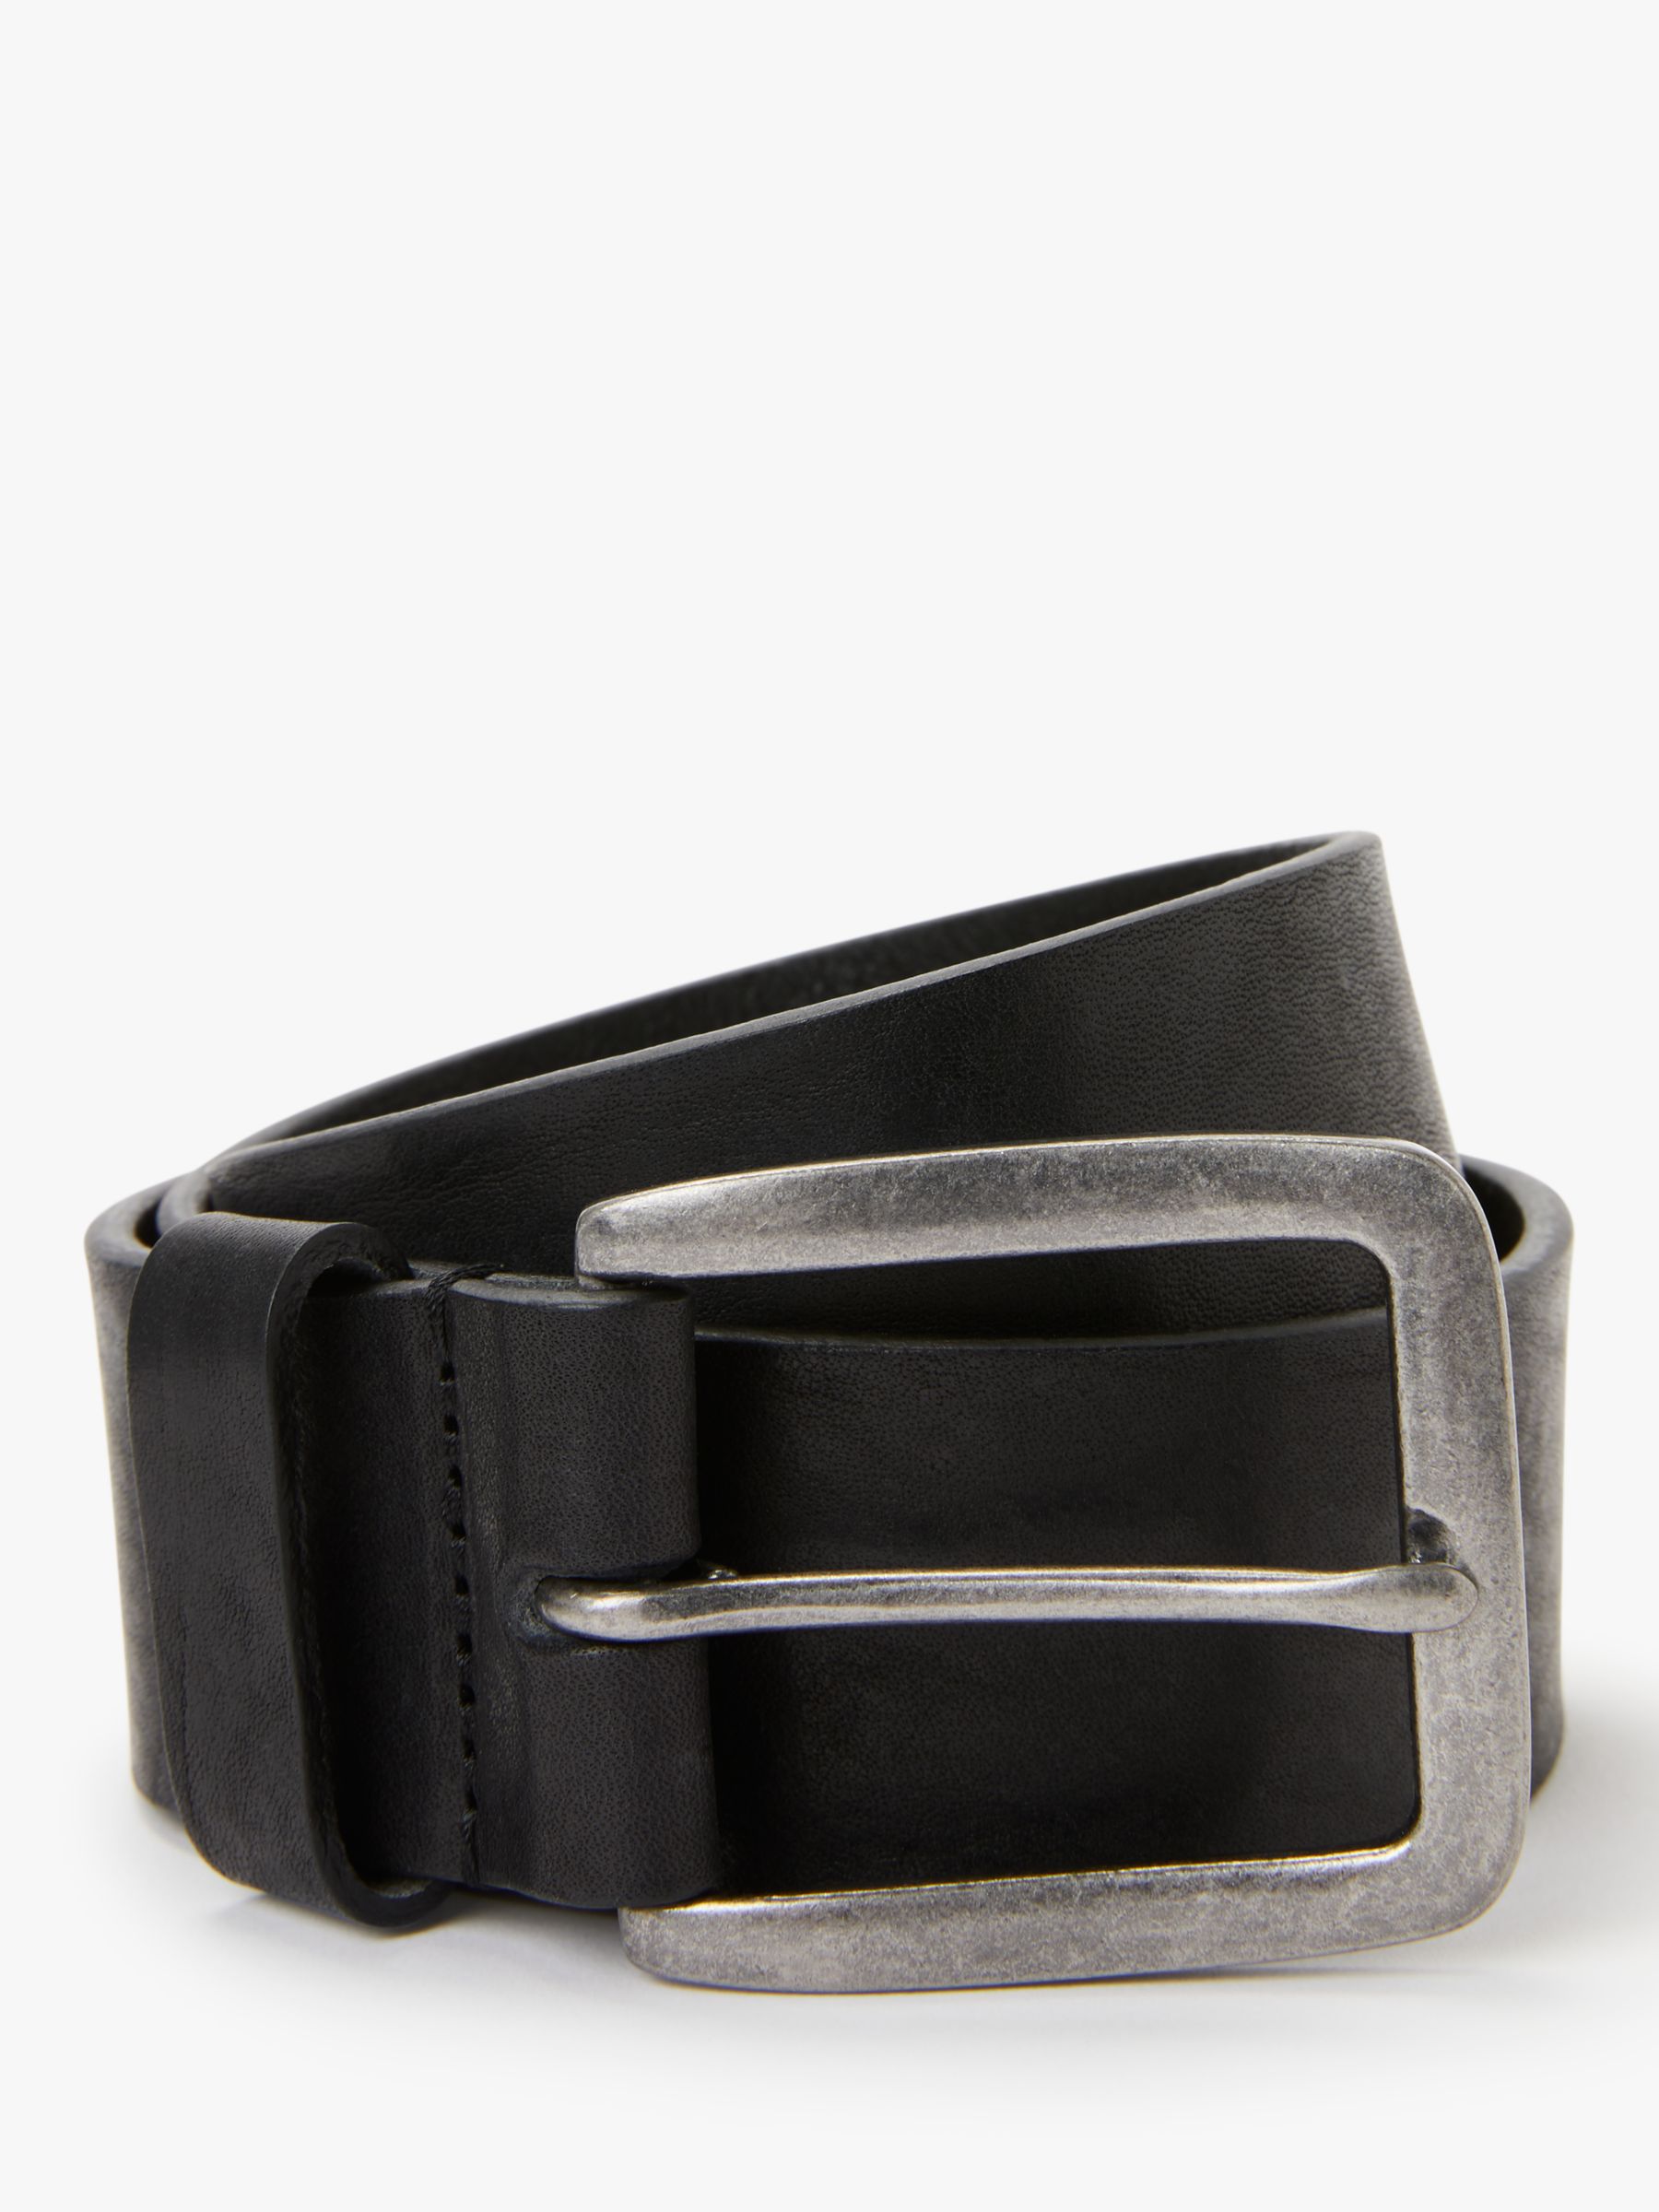 John Lewis Made in Italy Leather Jeans Belt, Black, XL